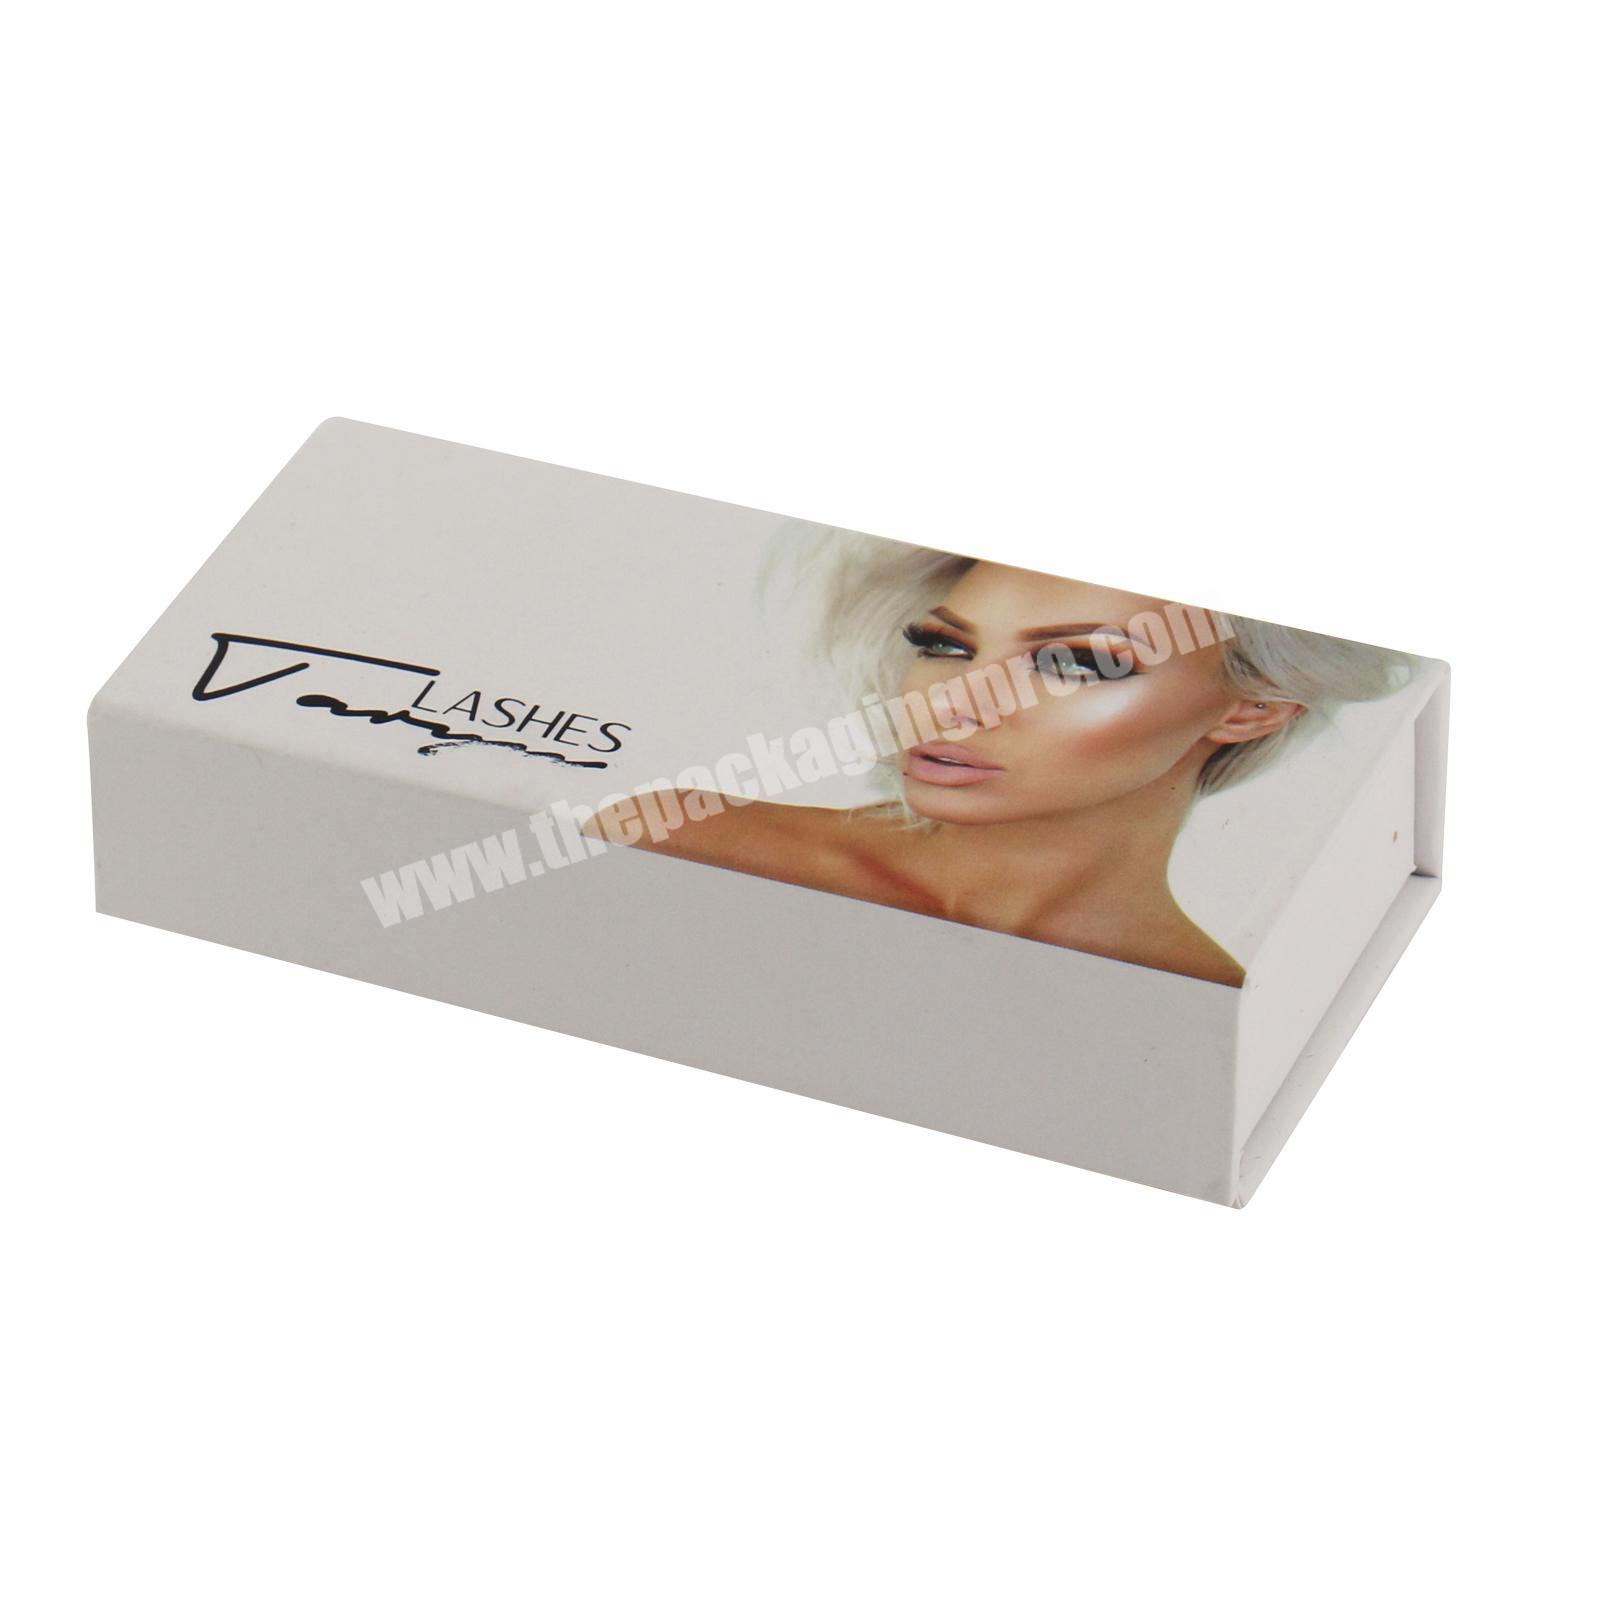 clamshell box eyelash box cosmetic custom logo color design size packaging paper gift boxes